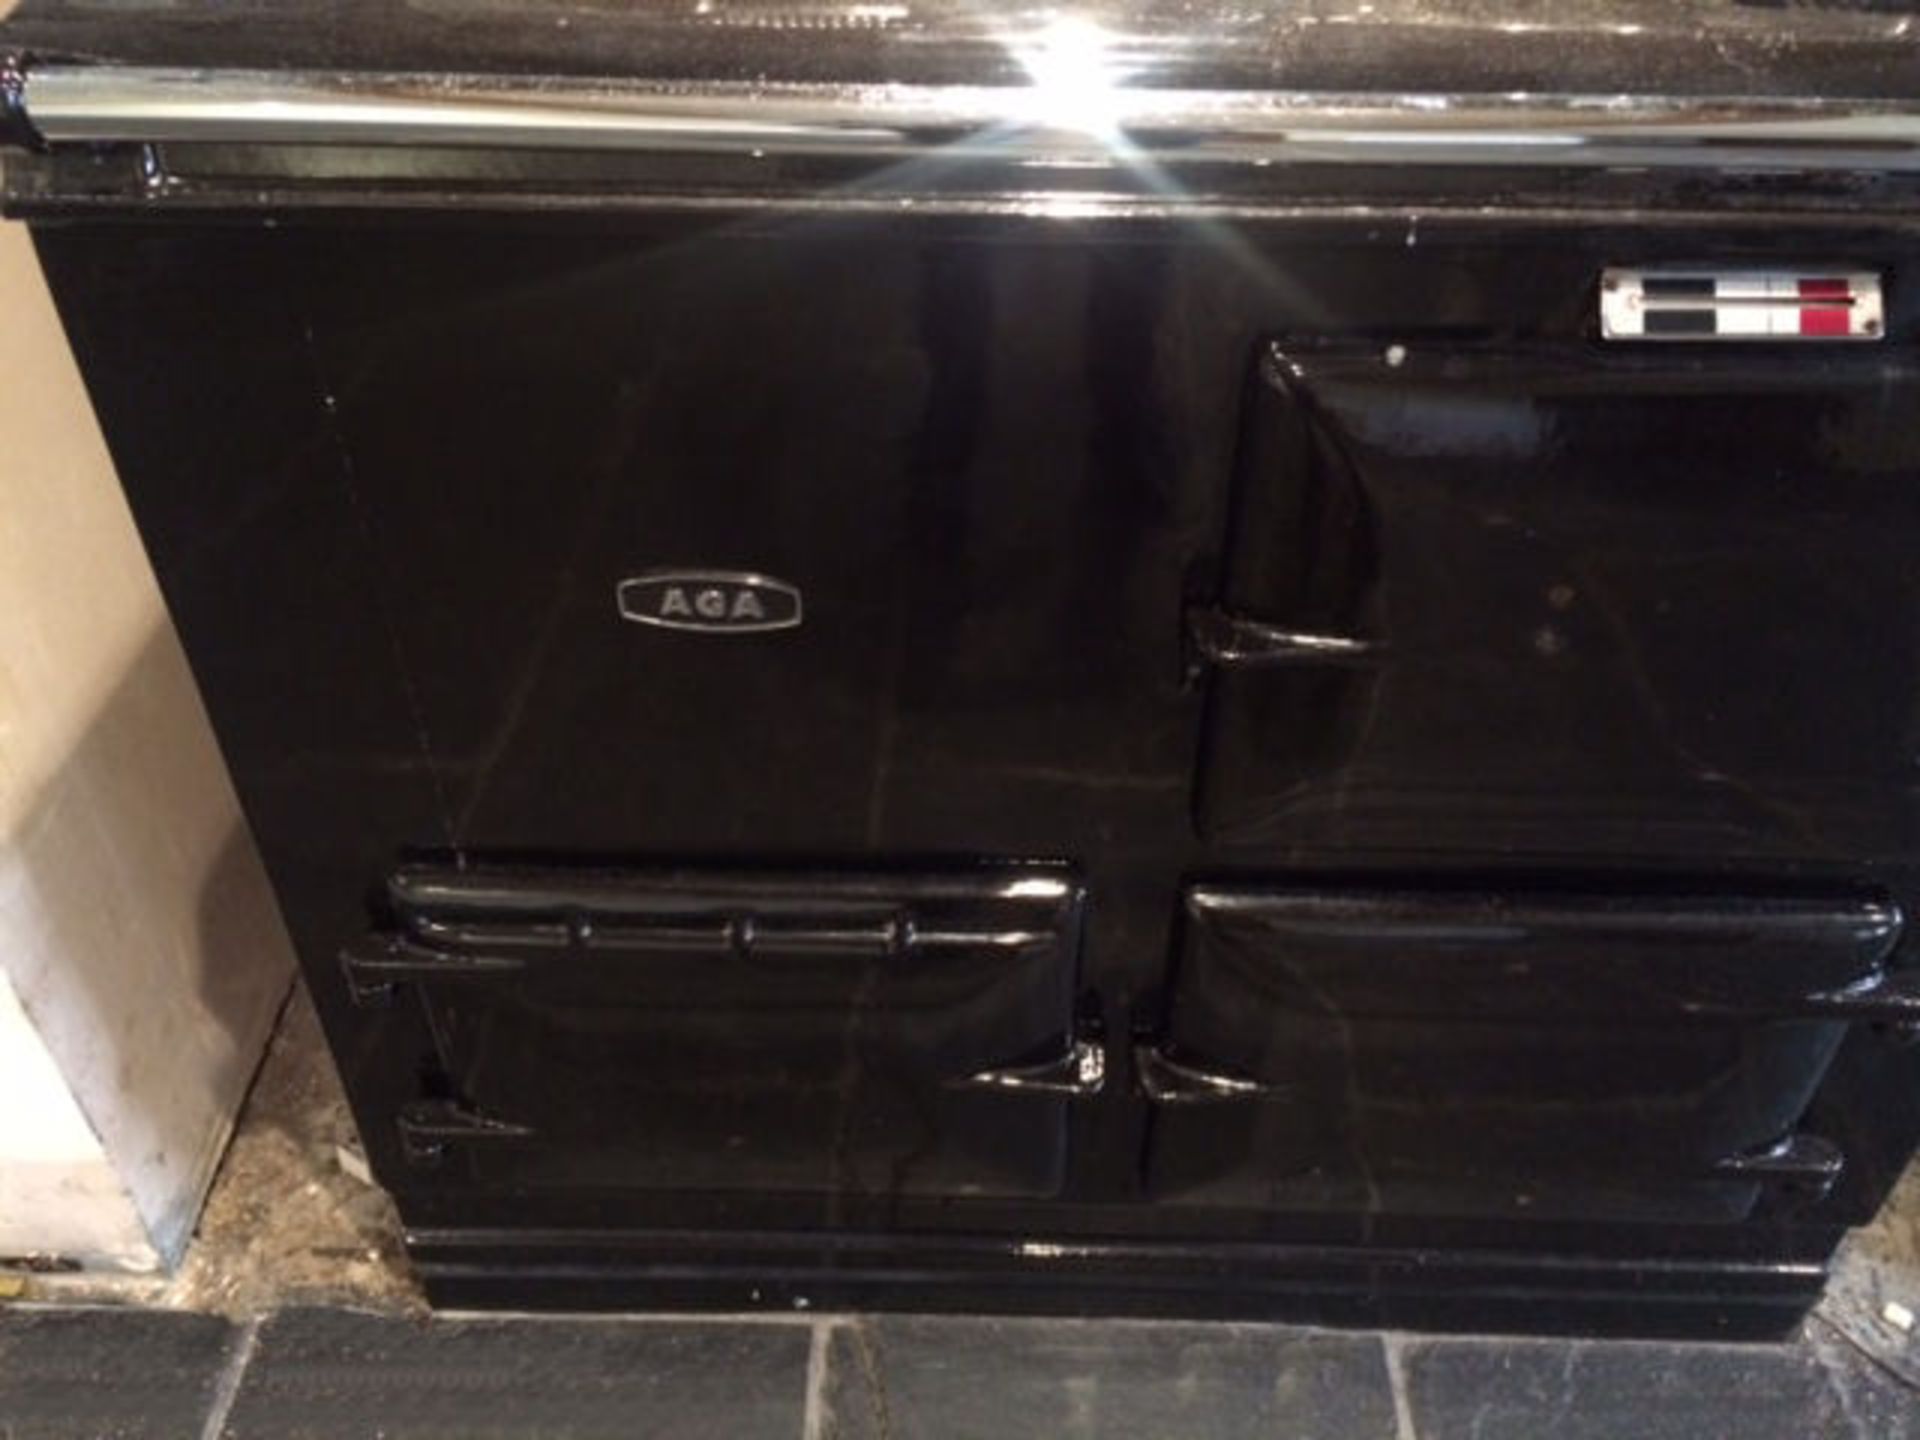 1 x Aga 2-Oven Gas Range Cooker - Cast Iron With Black Enamel Finish - Preowned In Good Working Cond - Image 8 of 10